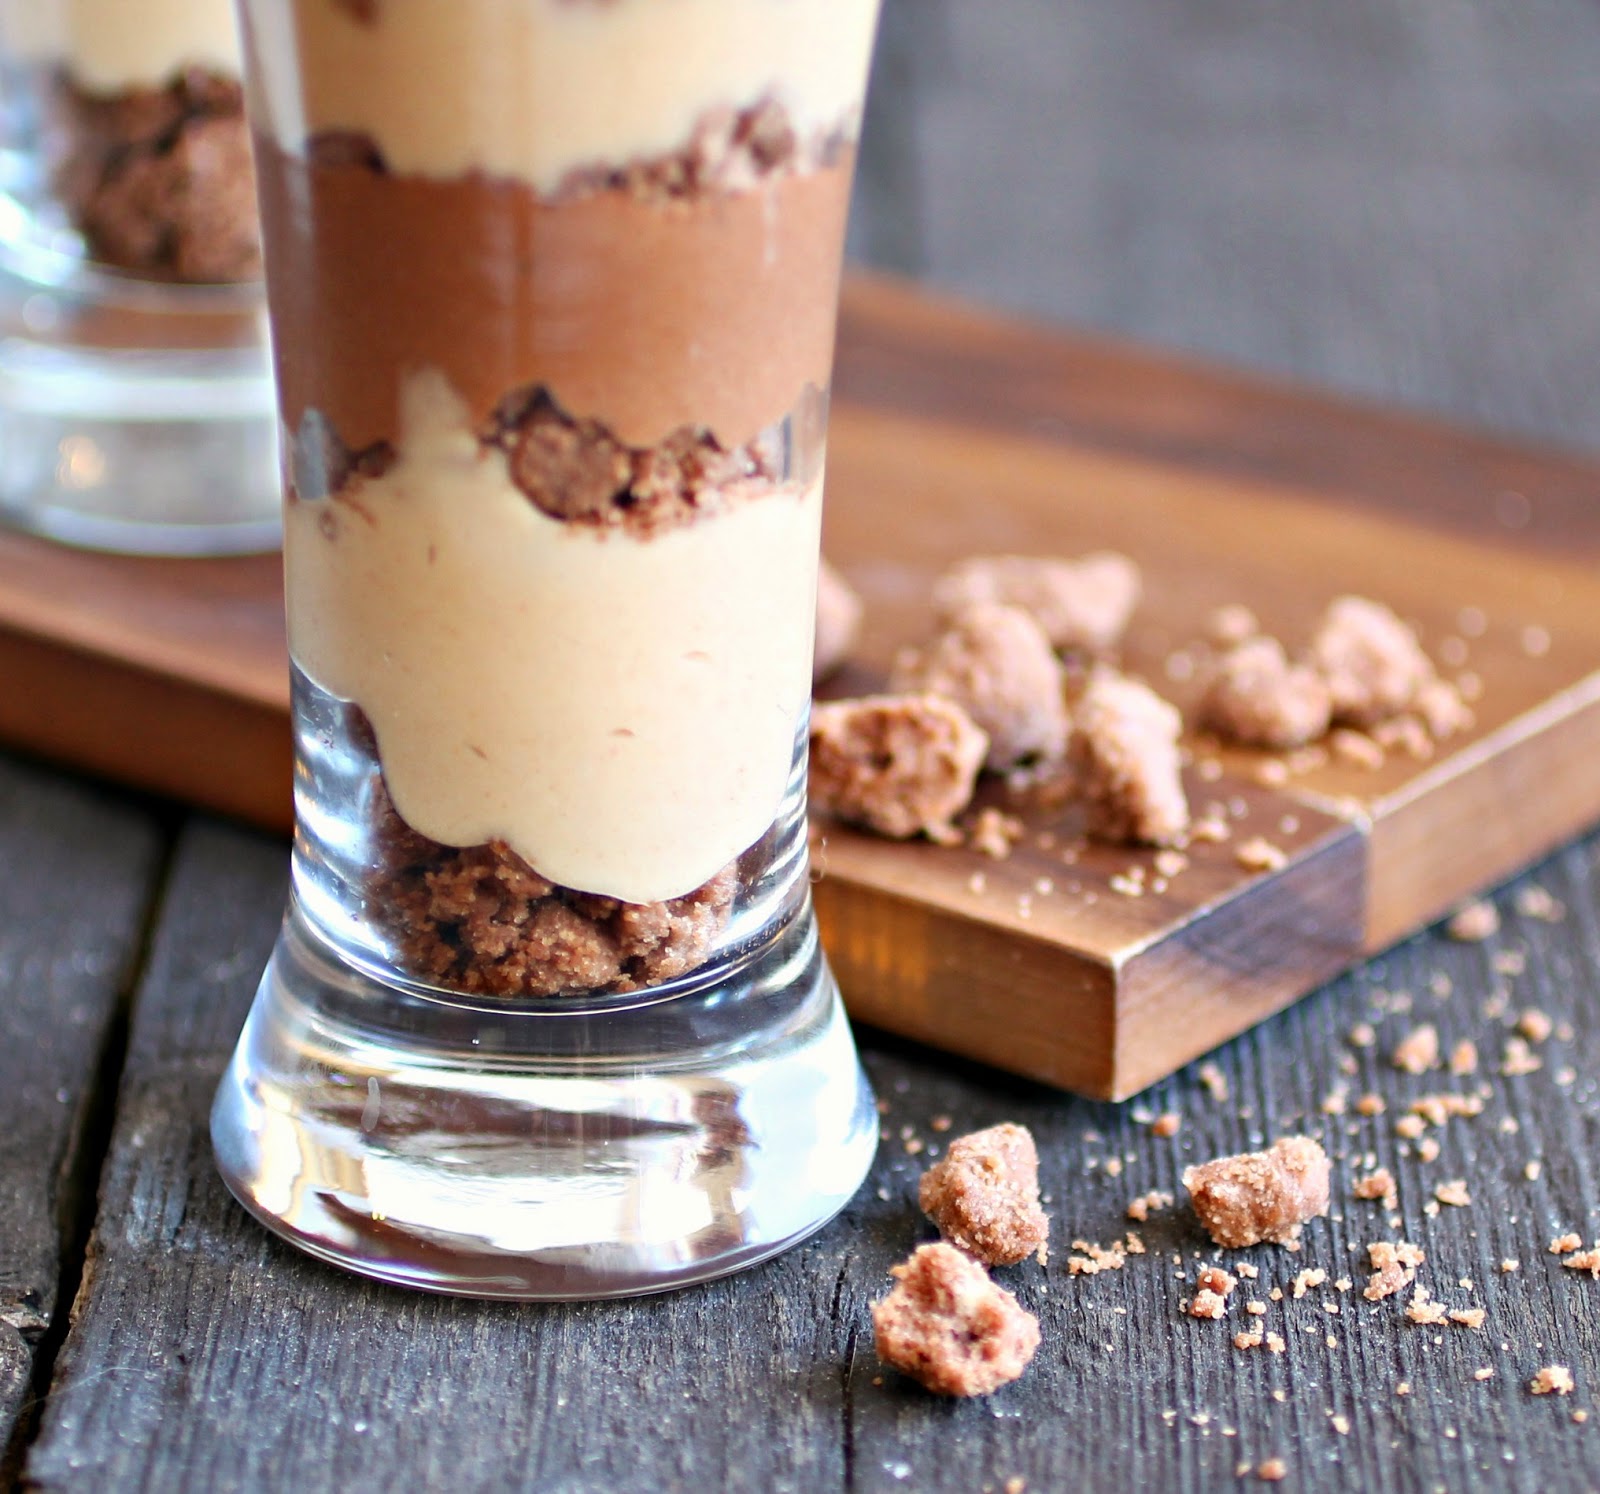 Chocolate and Peanut Butter Crumb Parfaits